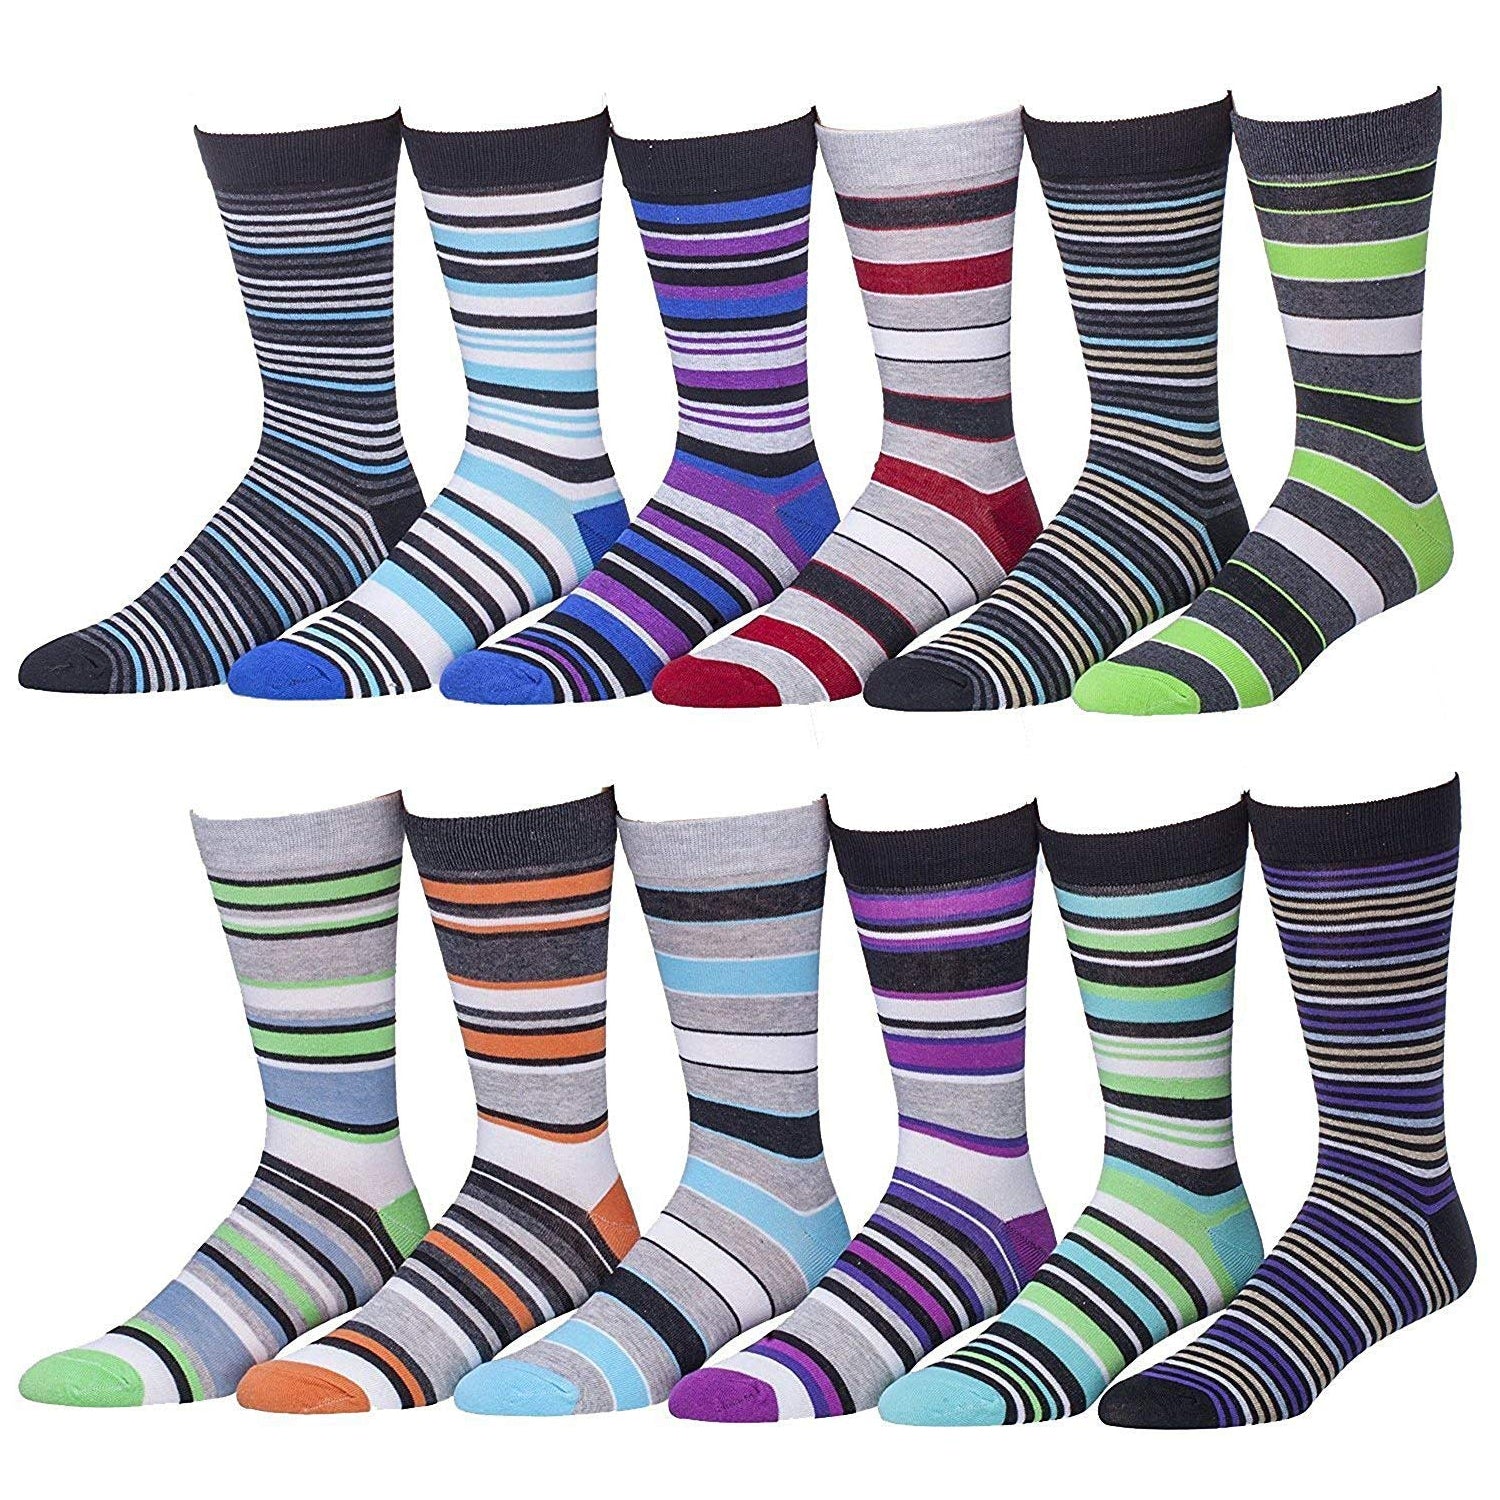 12 Pairs of Men's Dress Socks Assorted Colors and Patterns, Size 10-13 ...